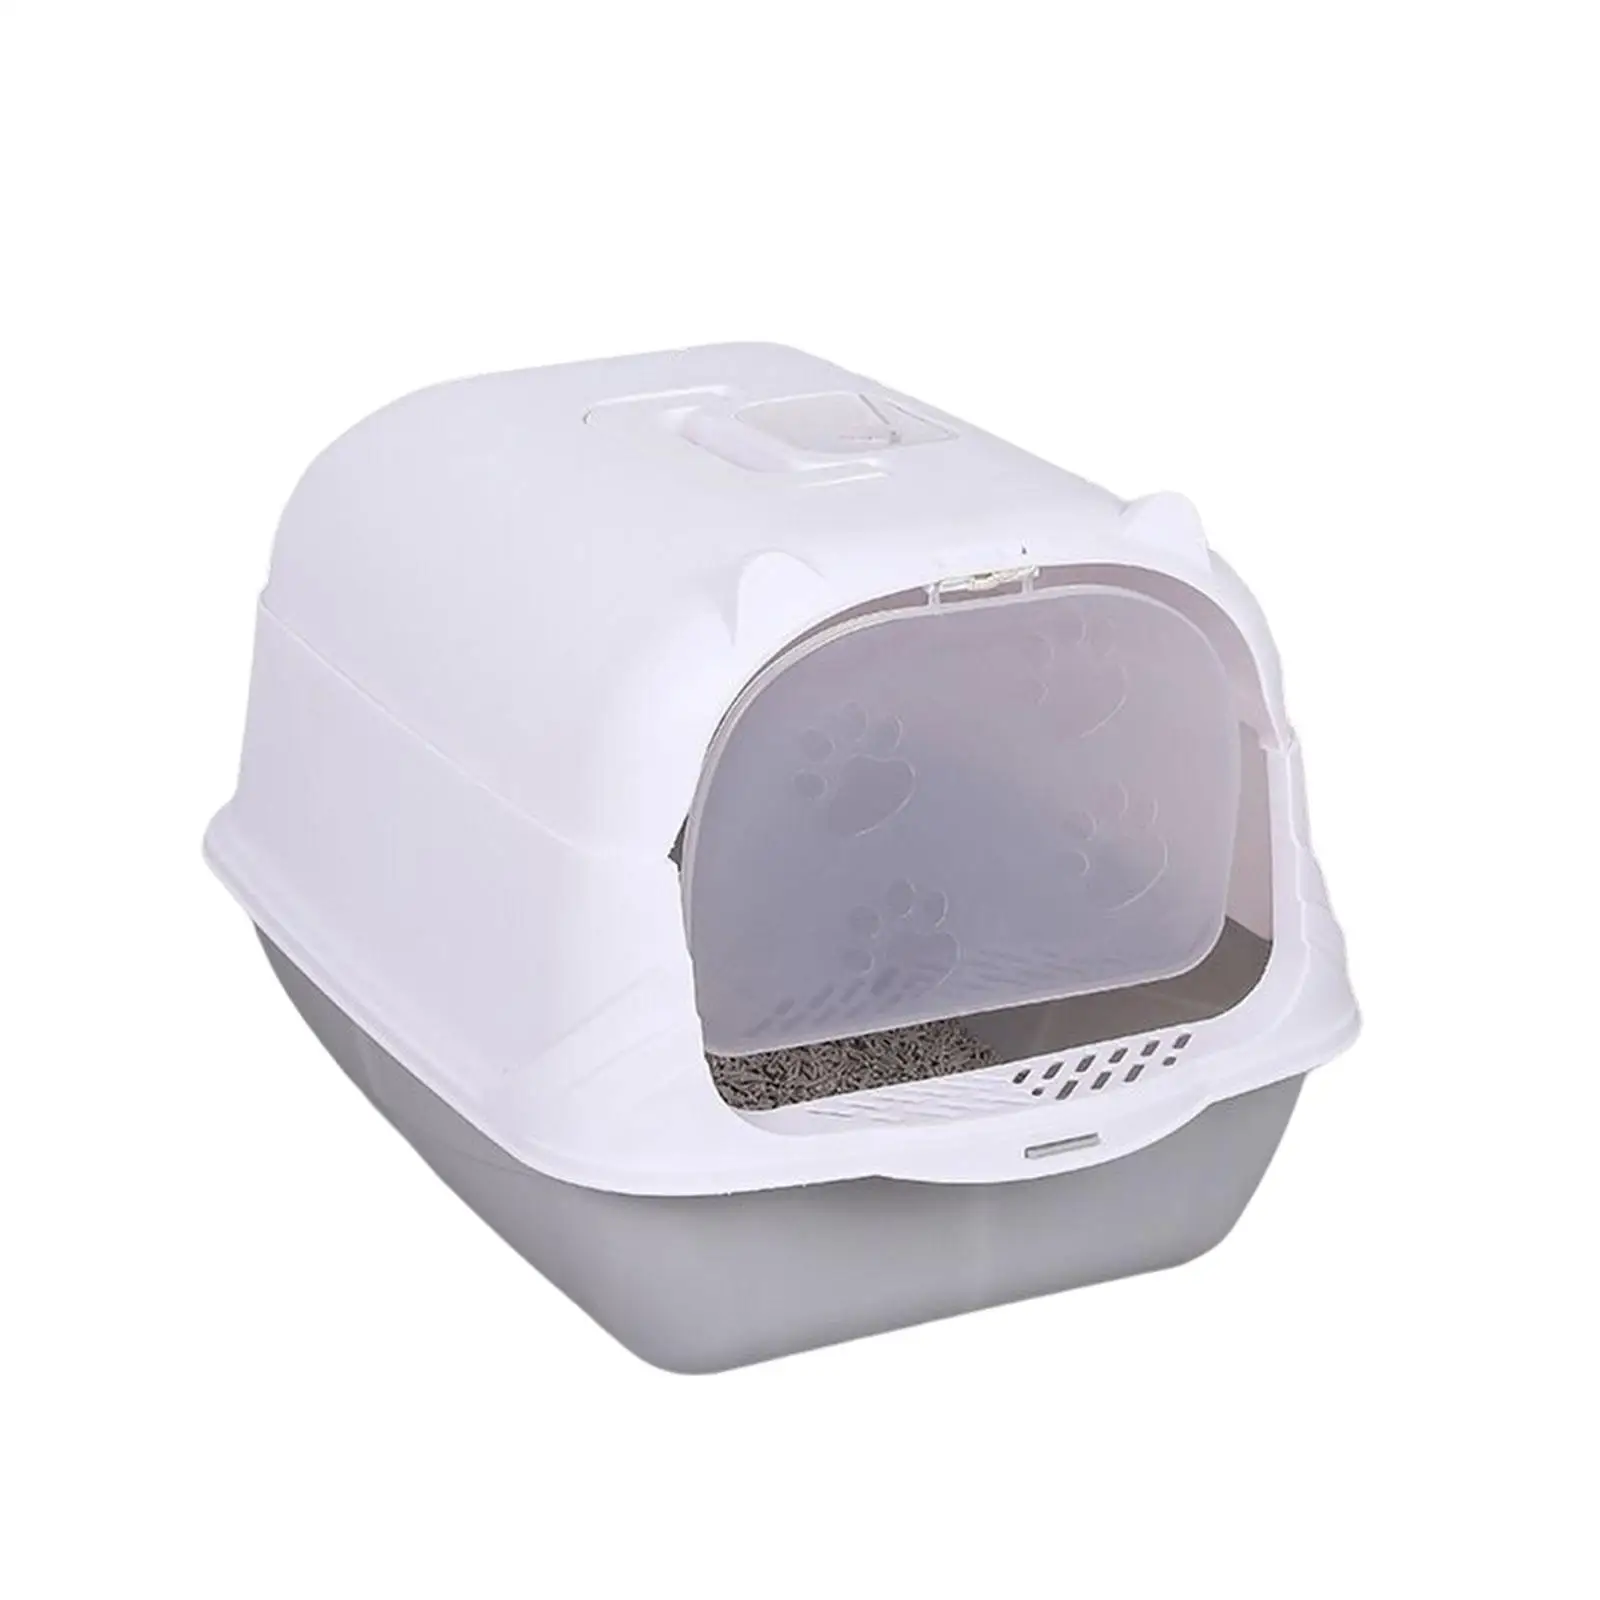 High Sided Pet Litter Tray Enclosed Potty Toilet Container Pan Include Spoon